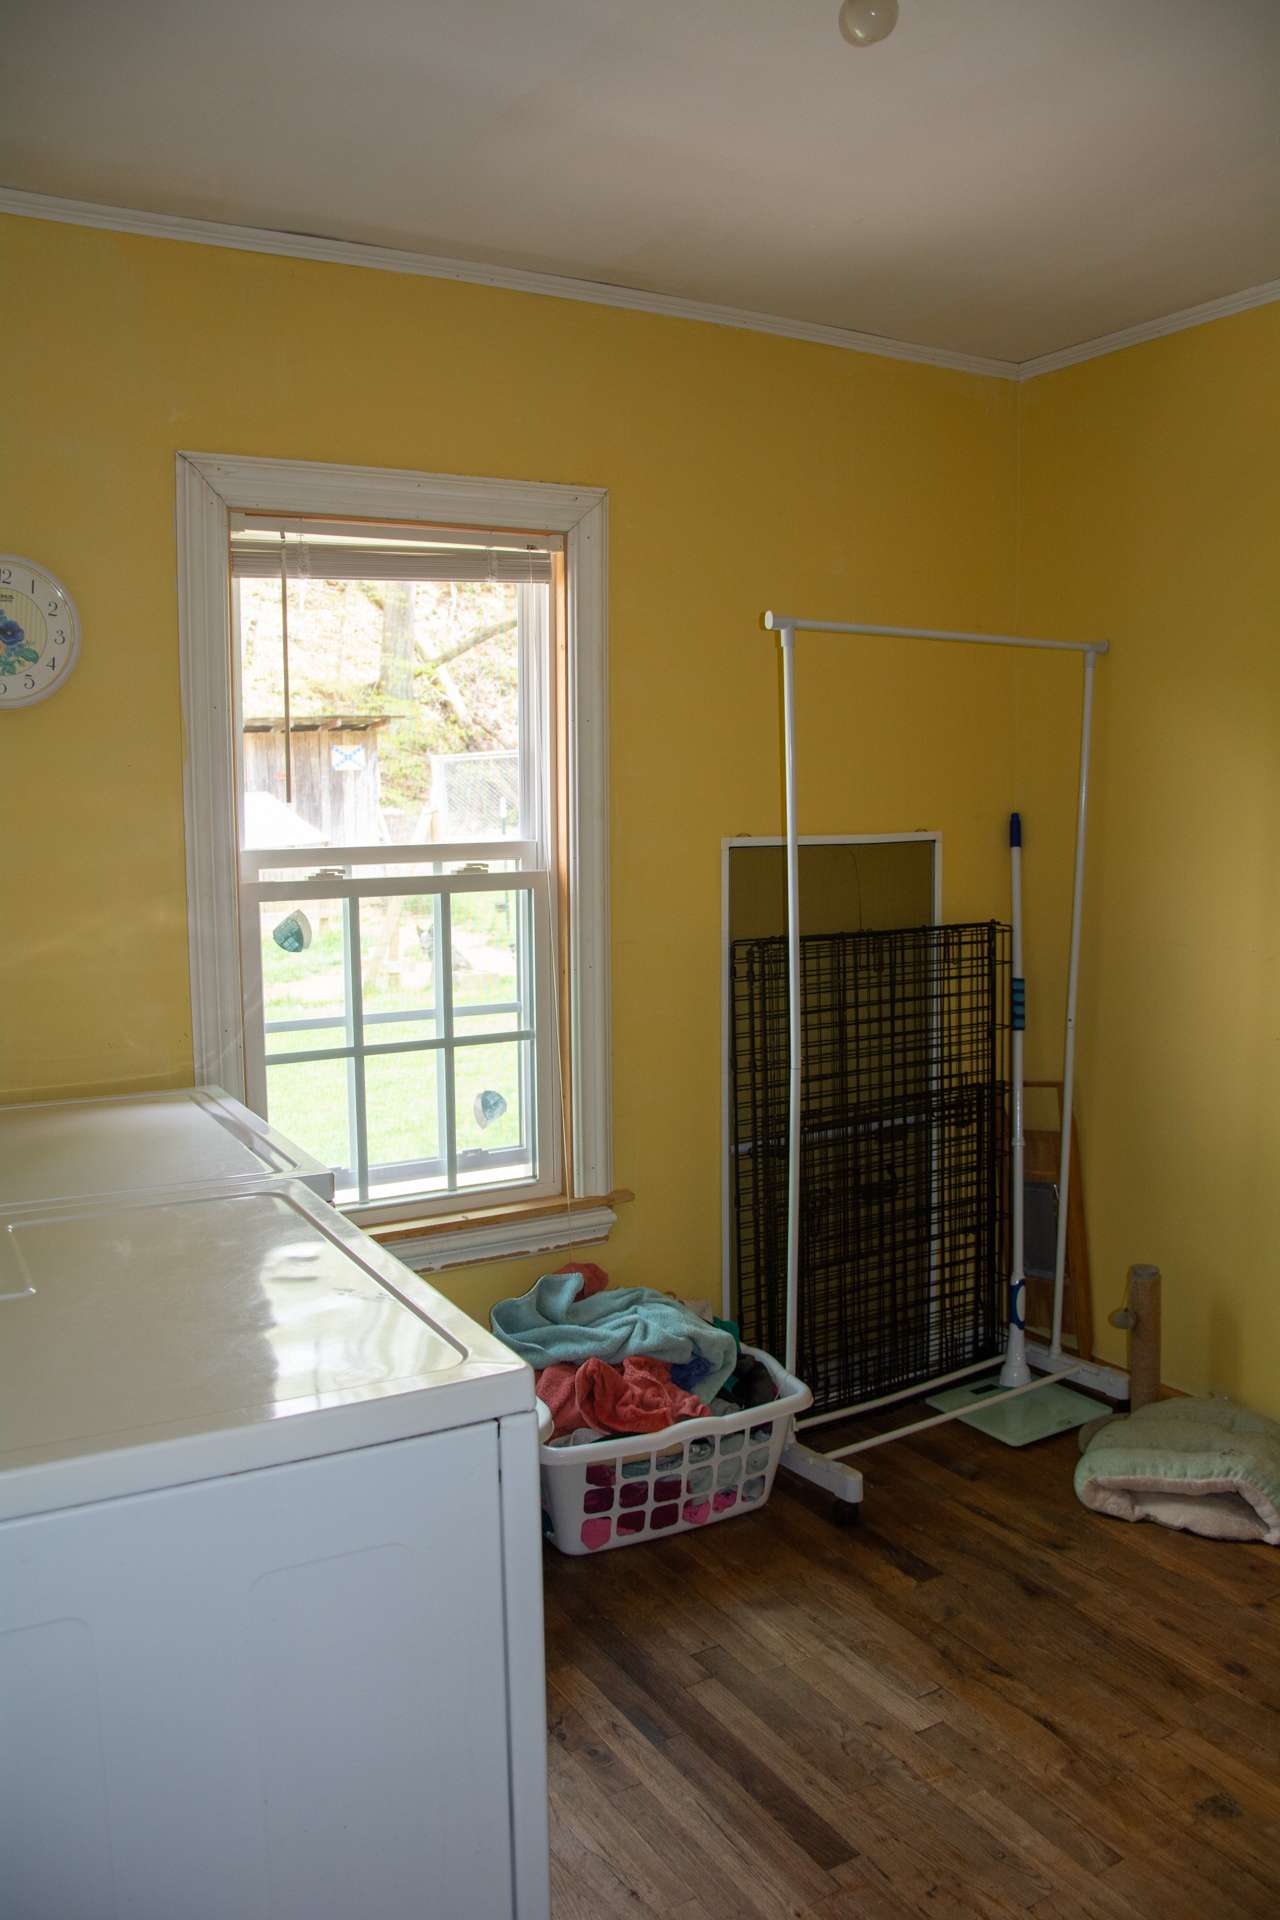 The third bedroom is currently utilized as laundry room but could be converted back to bedroom if desired.